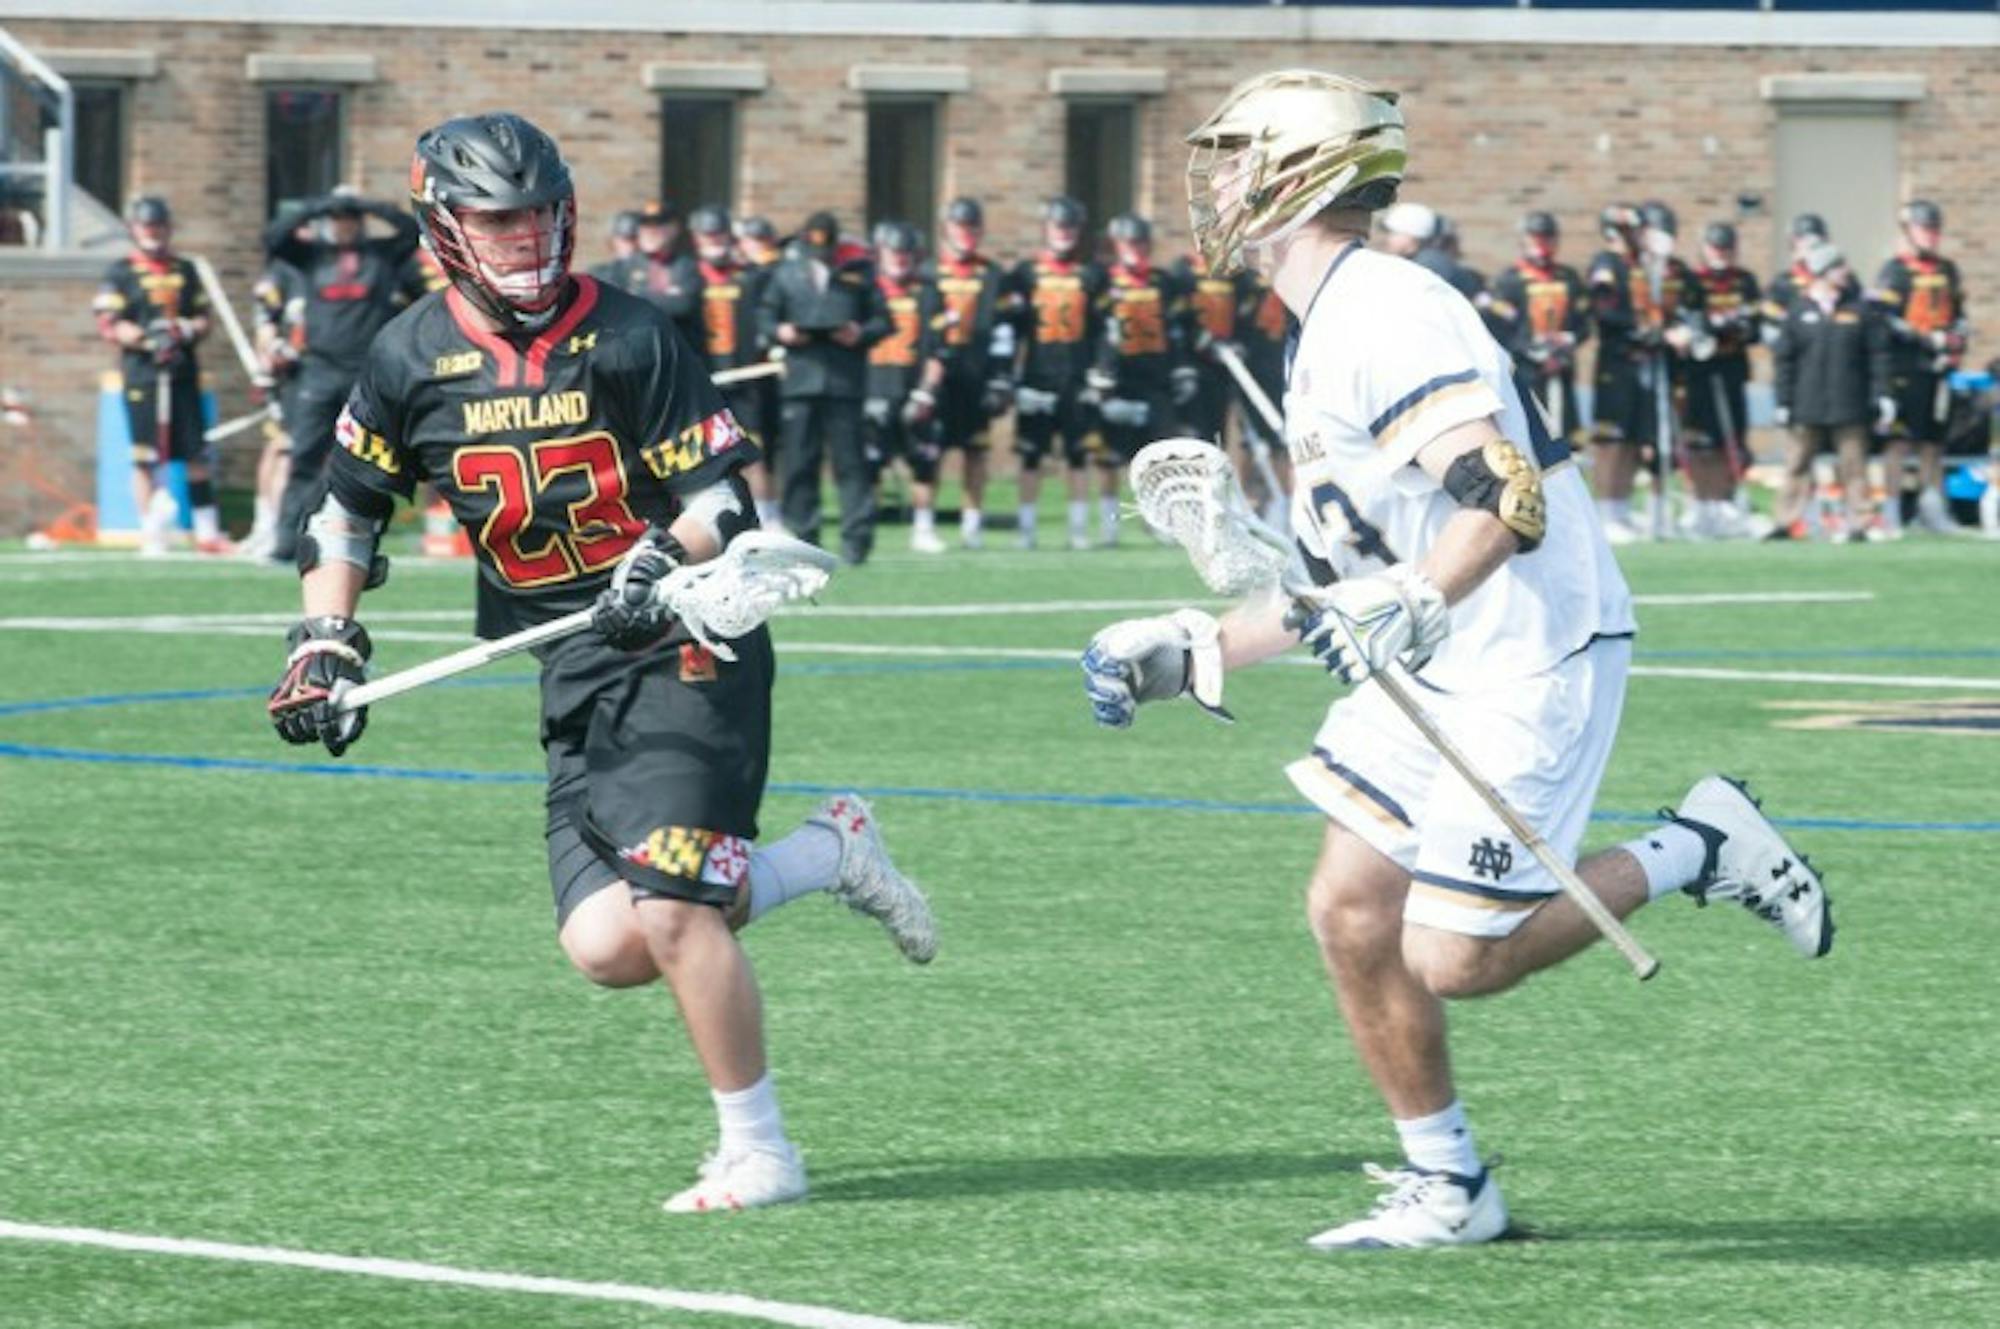 Irish senior midfielder Nick Koshansky looks to get by a defender during Notre Dame’s 5-4 victory over Maryland on Saturday at Arlotta Field. After the win, the Irish are now ranked No. 1 in the country.